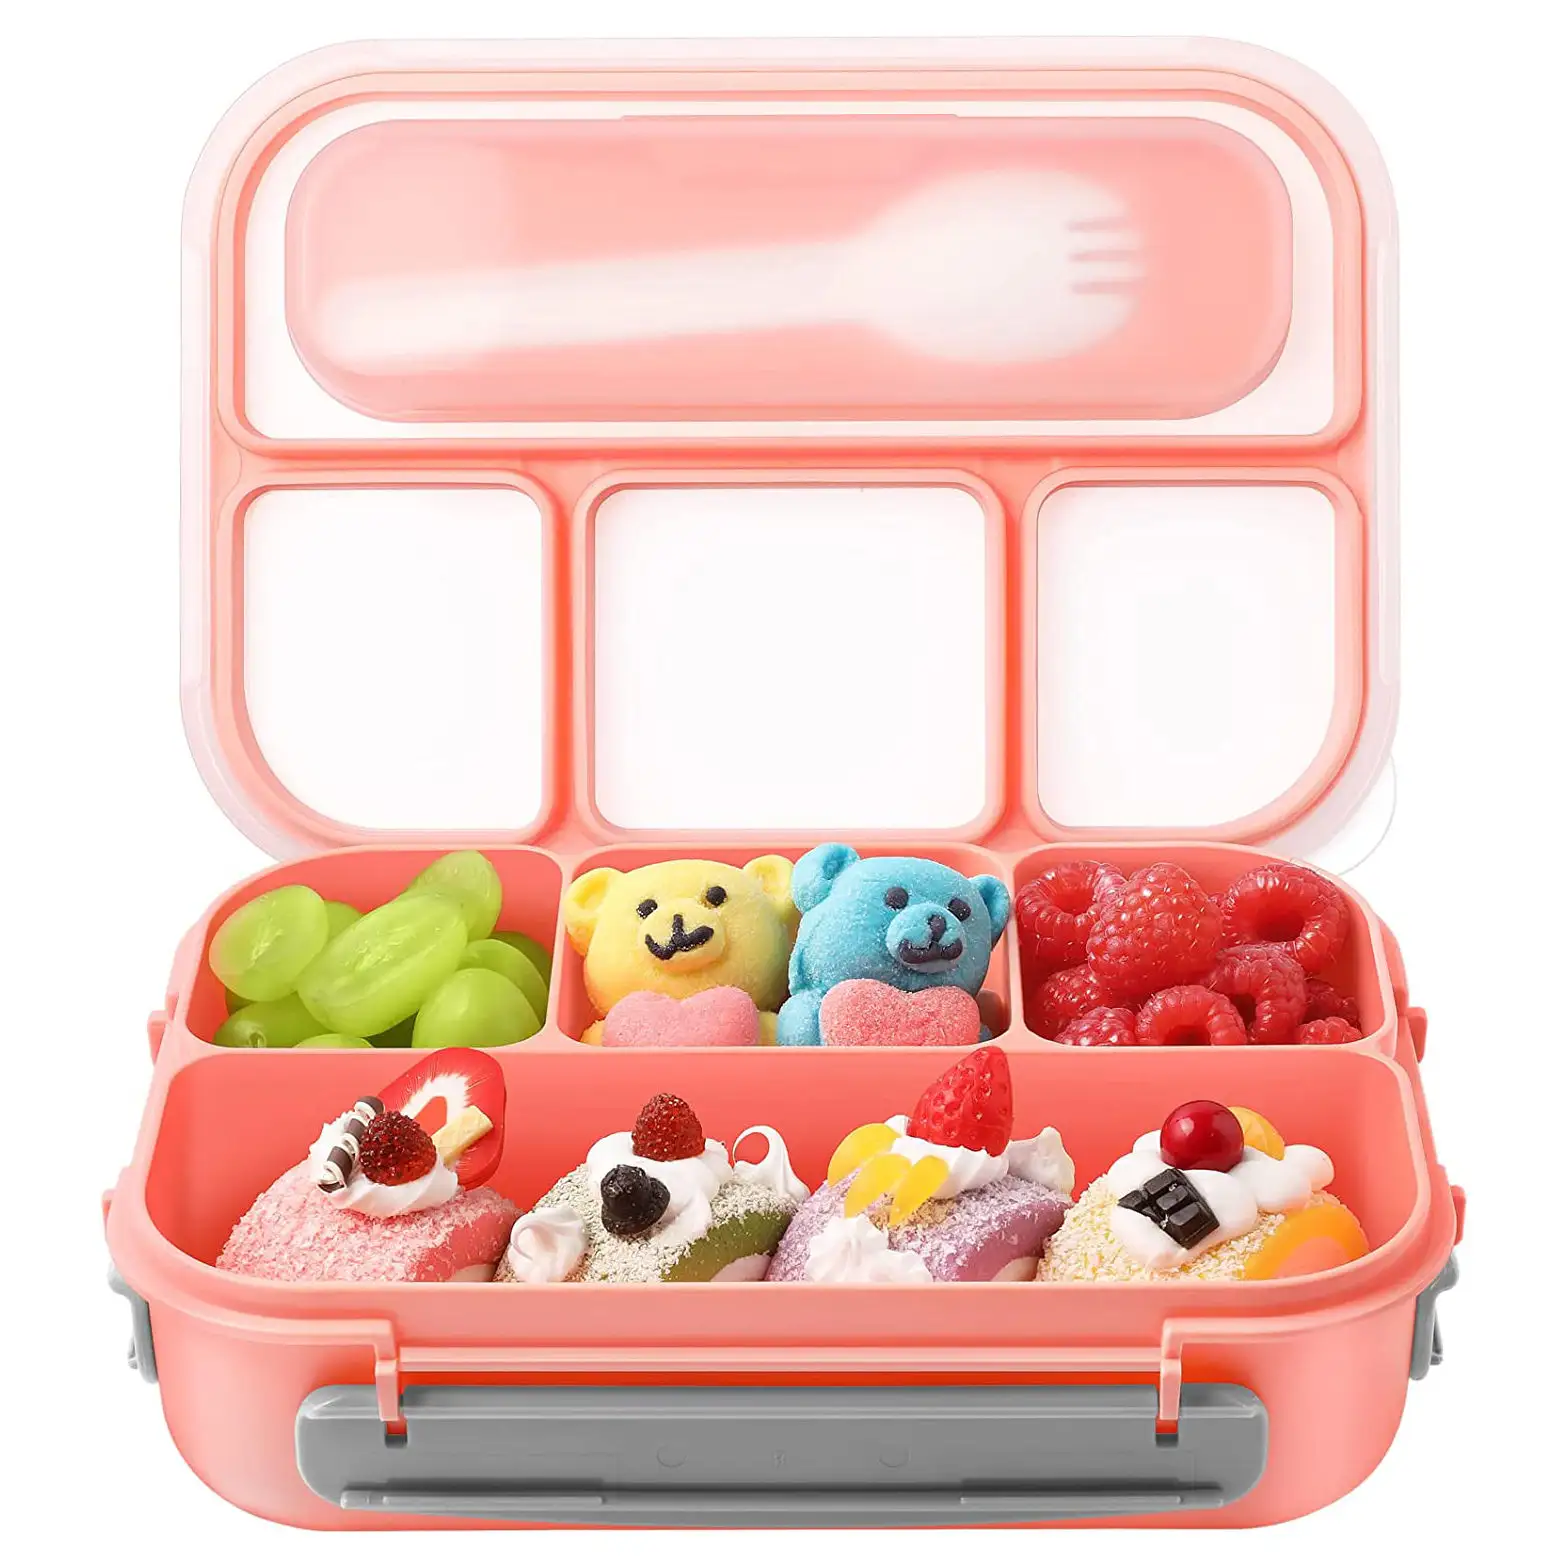 Bento Box Adult Lunch BoxKids Lunch Containers for Adults/Kids/Toddler 1300ML-4 Compartment Bento Lunch Box